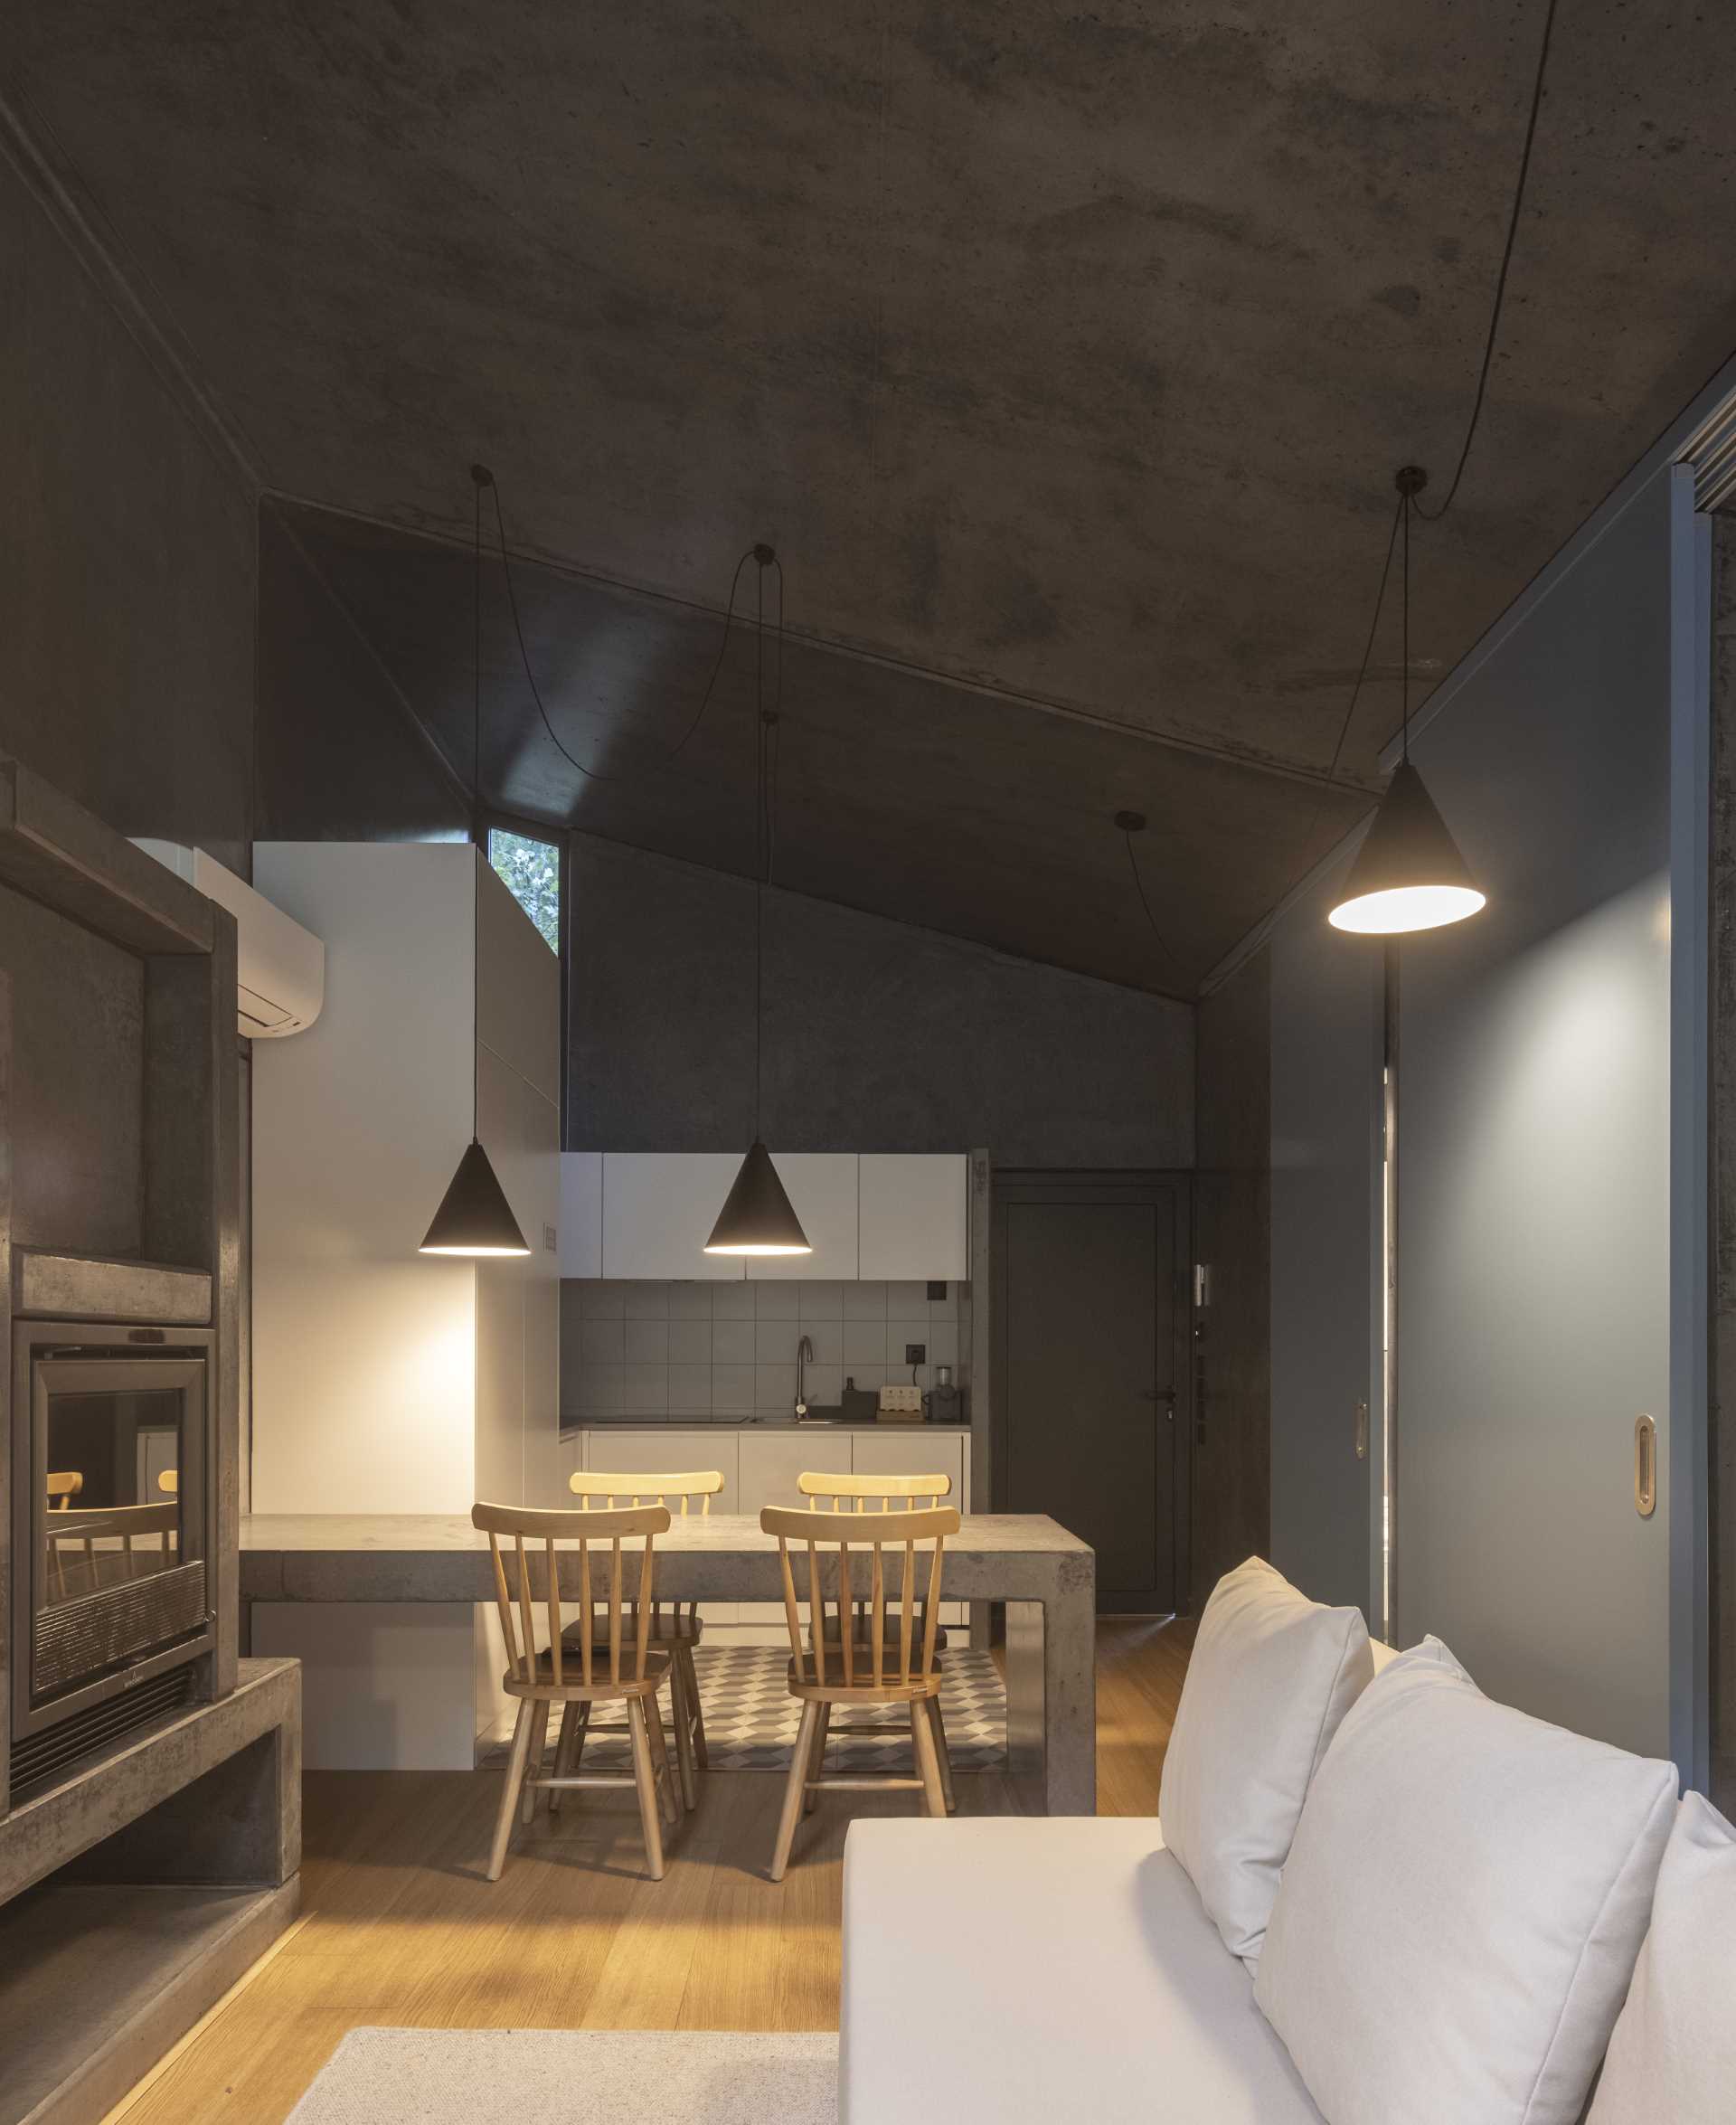 A small home with raw concrete walls, wood floors, a built-in dining table, and fireplace